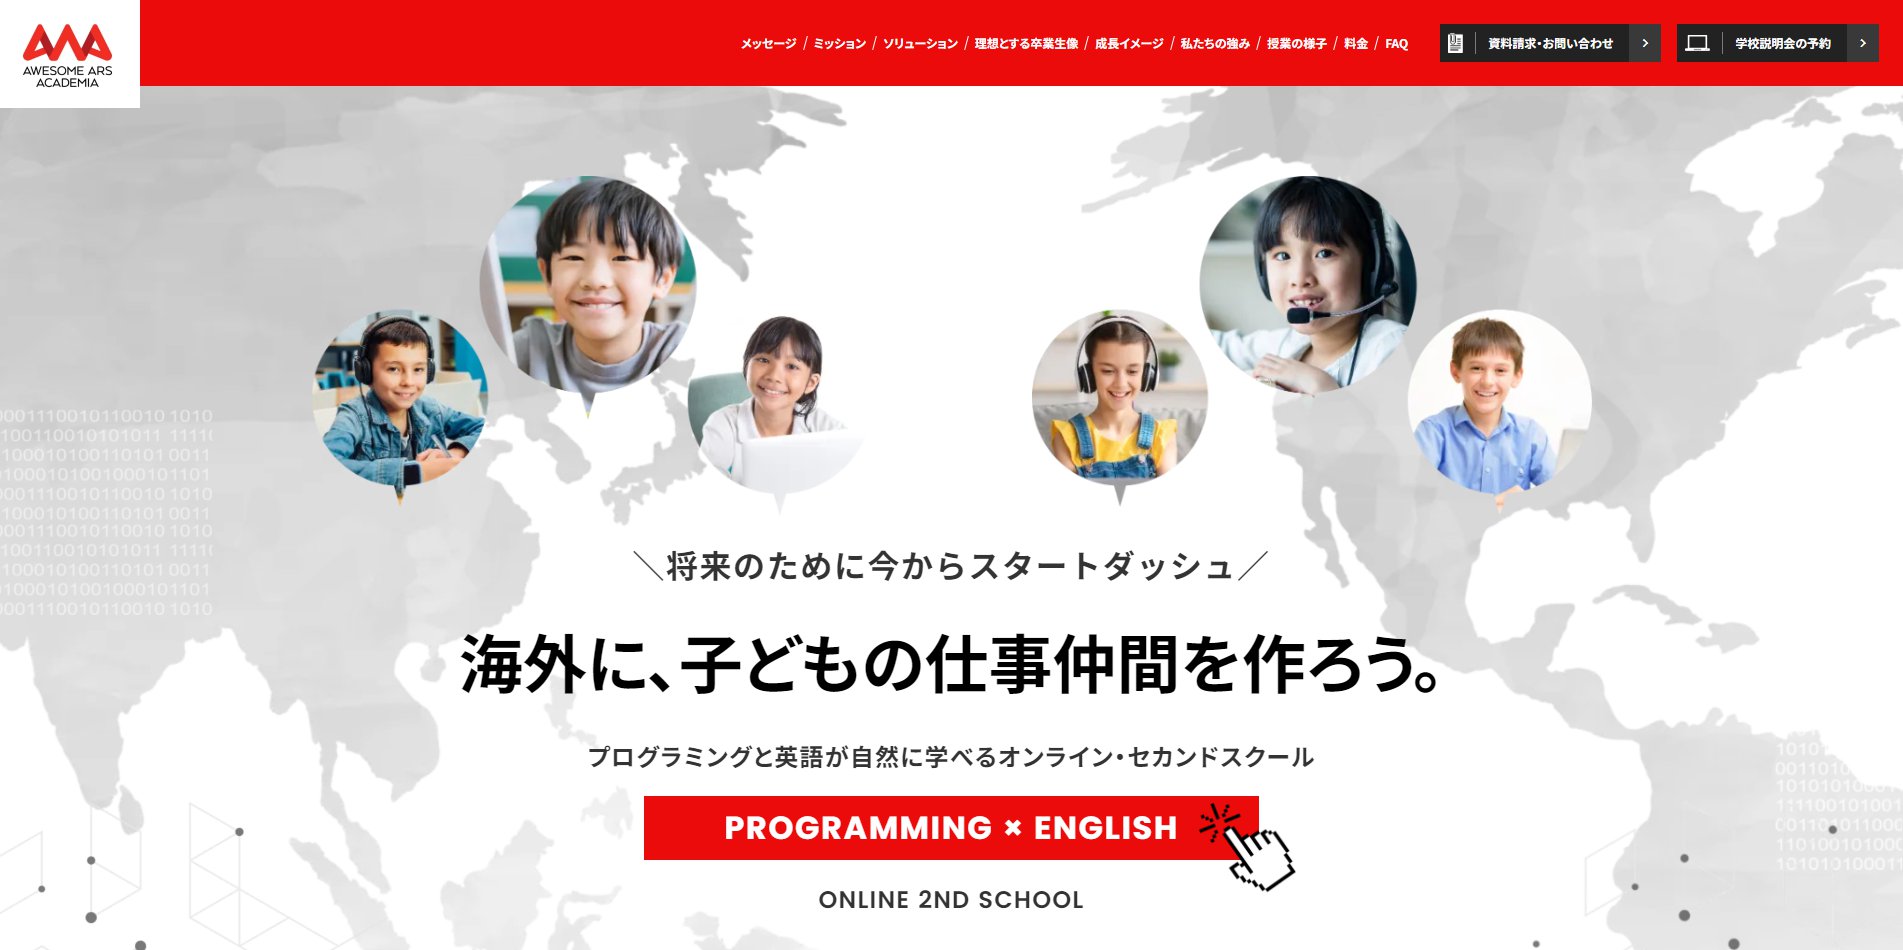 Awesome Ars Academia-公式サイト